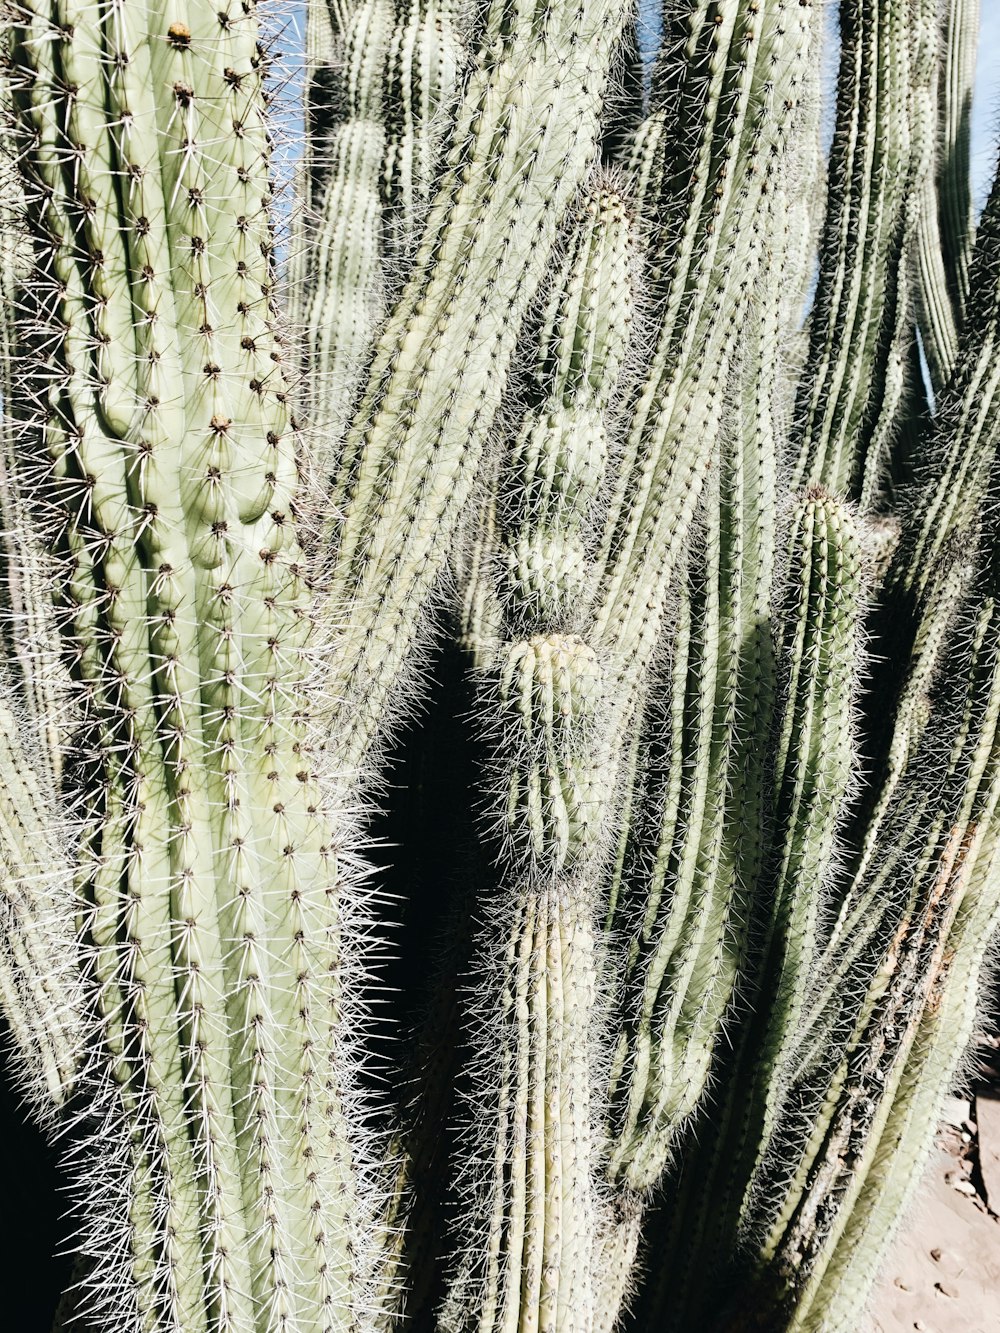 green cactus in close up photography